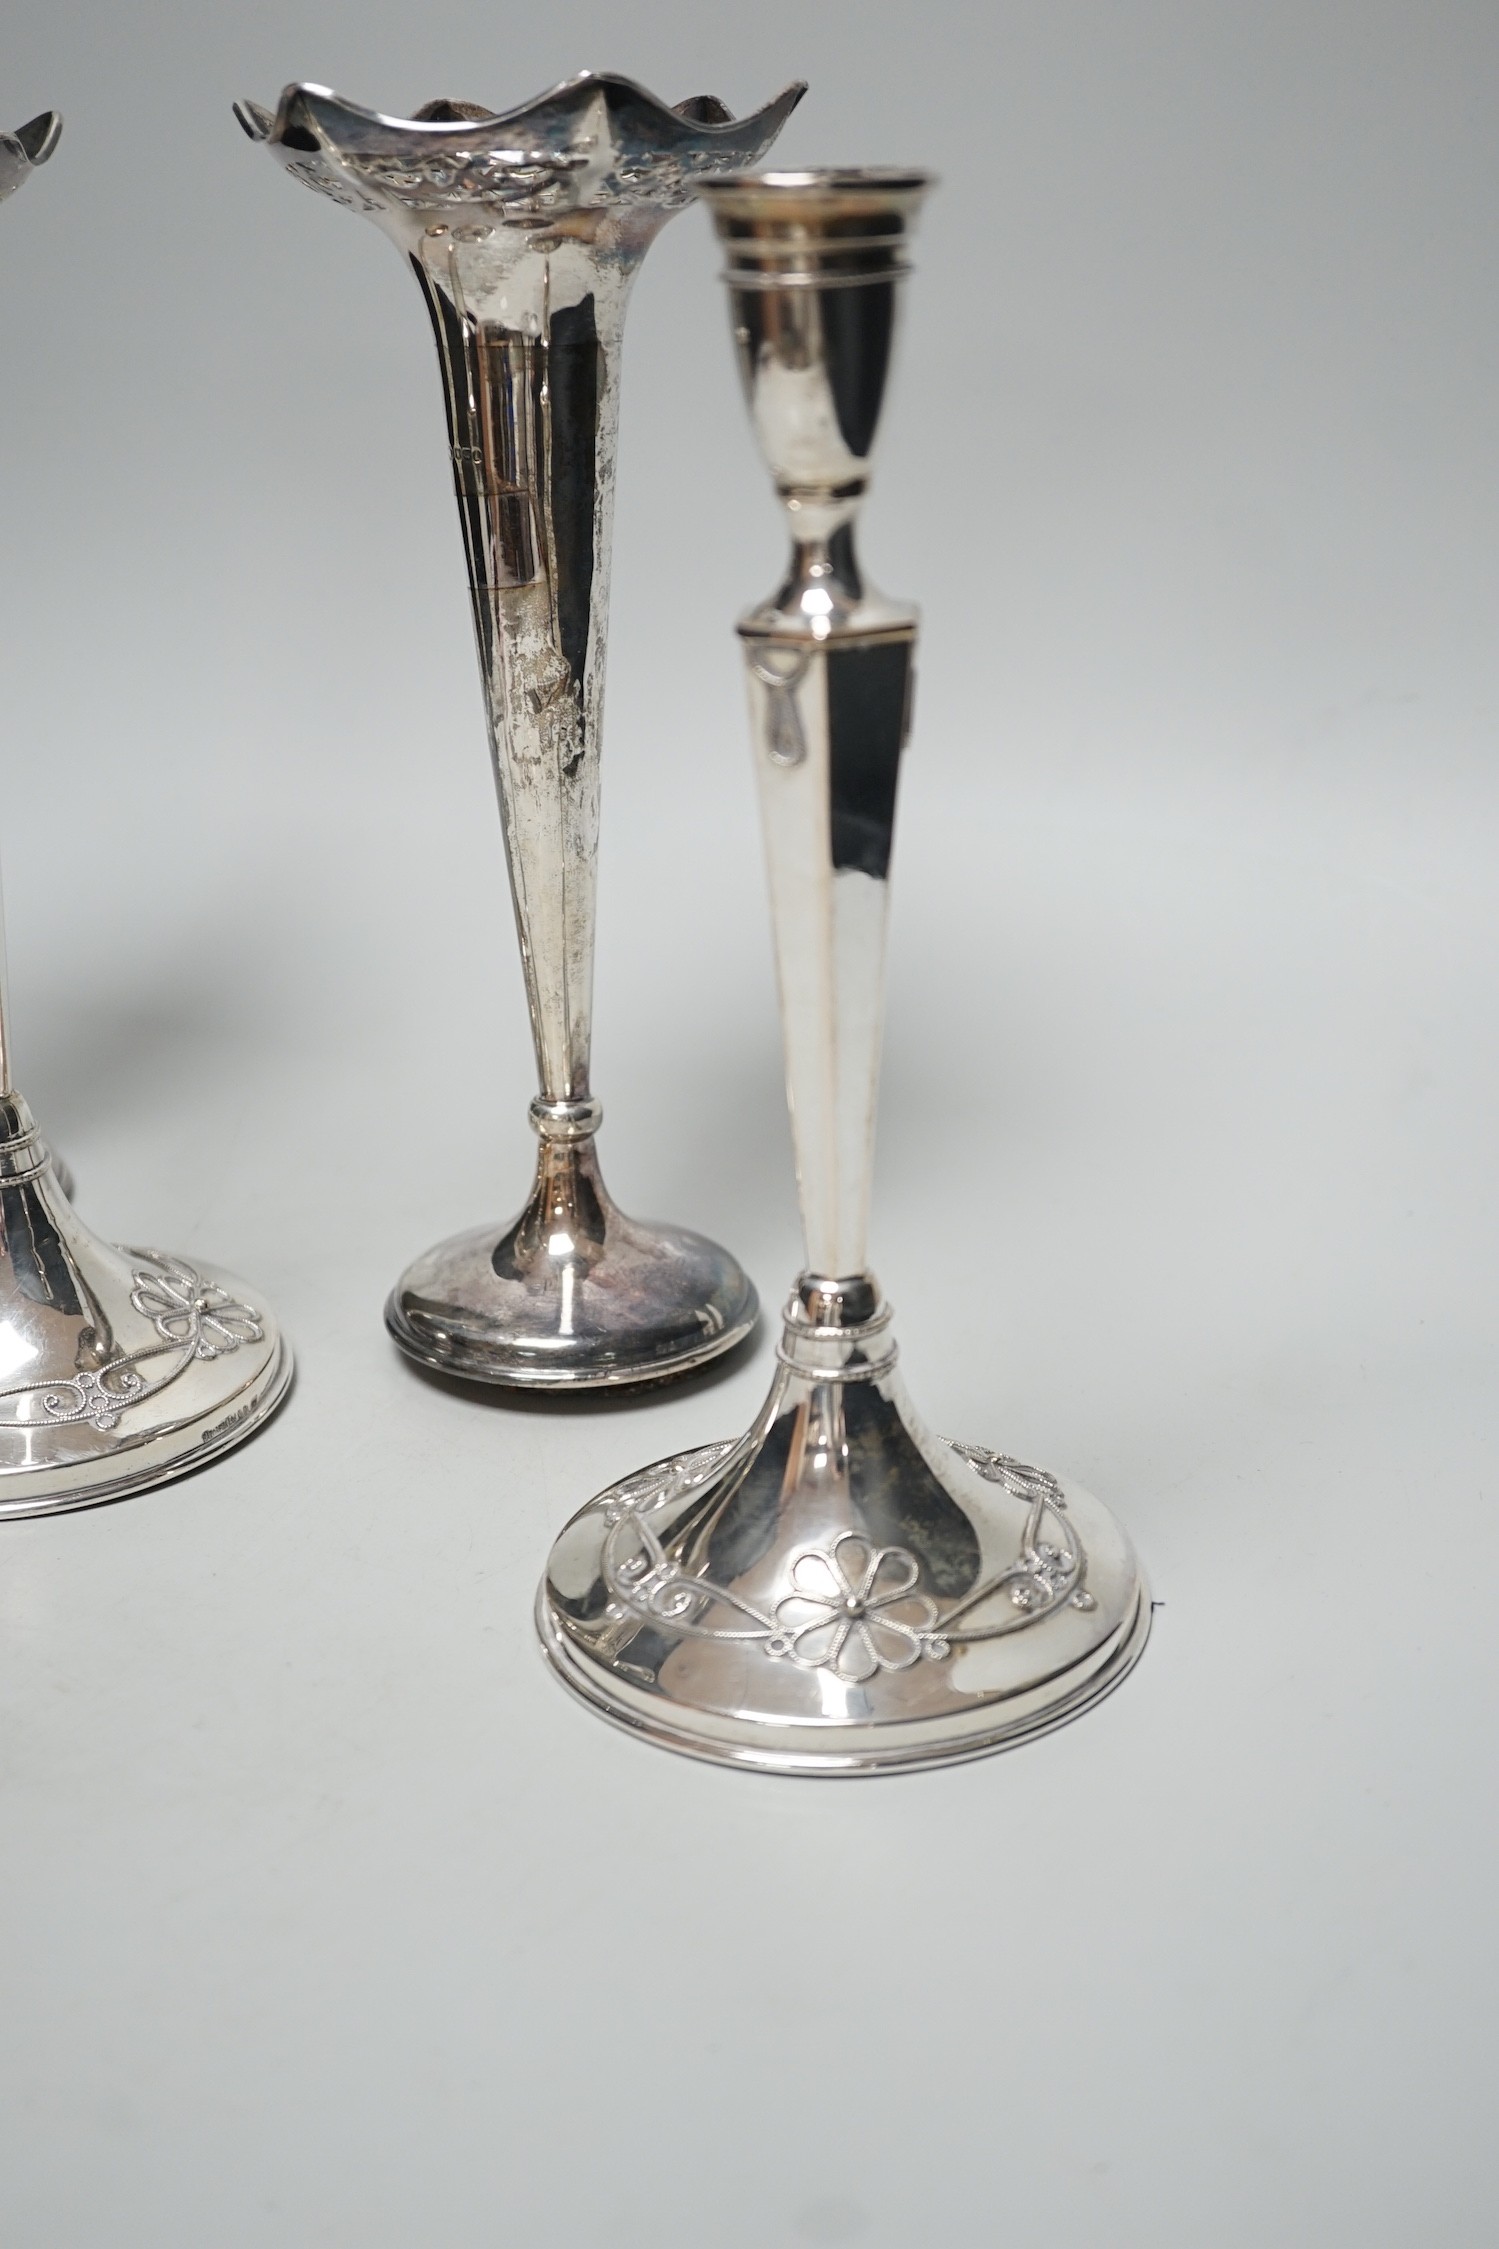 A pair of George V silver mounted posy vases, 22.3cm, weighted and a pair of German 800 standard white metal mounted candlesticks, weighted.